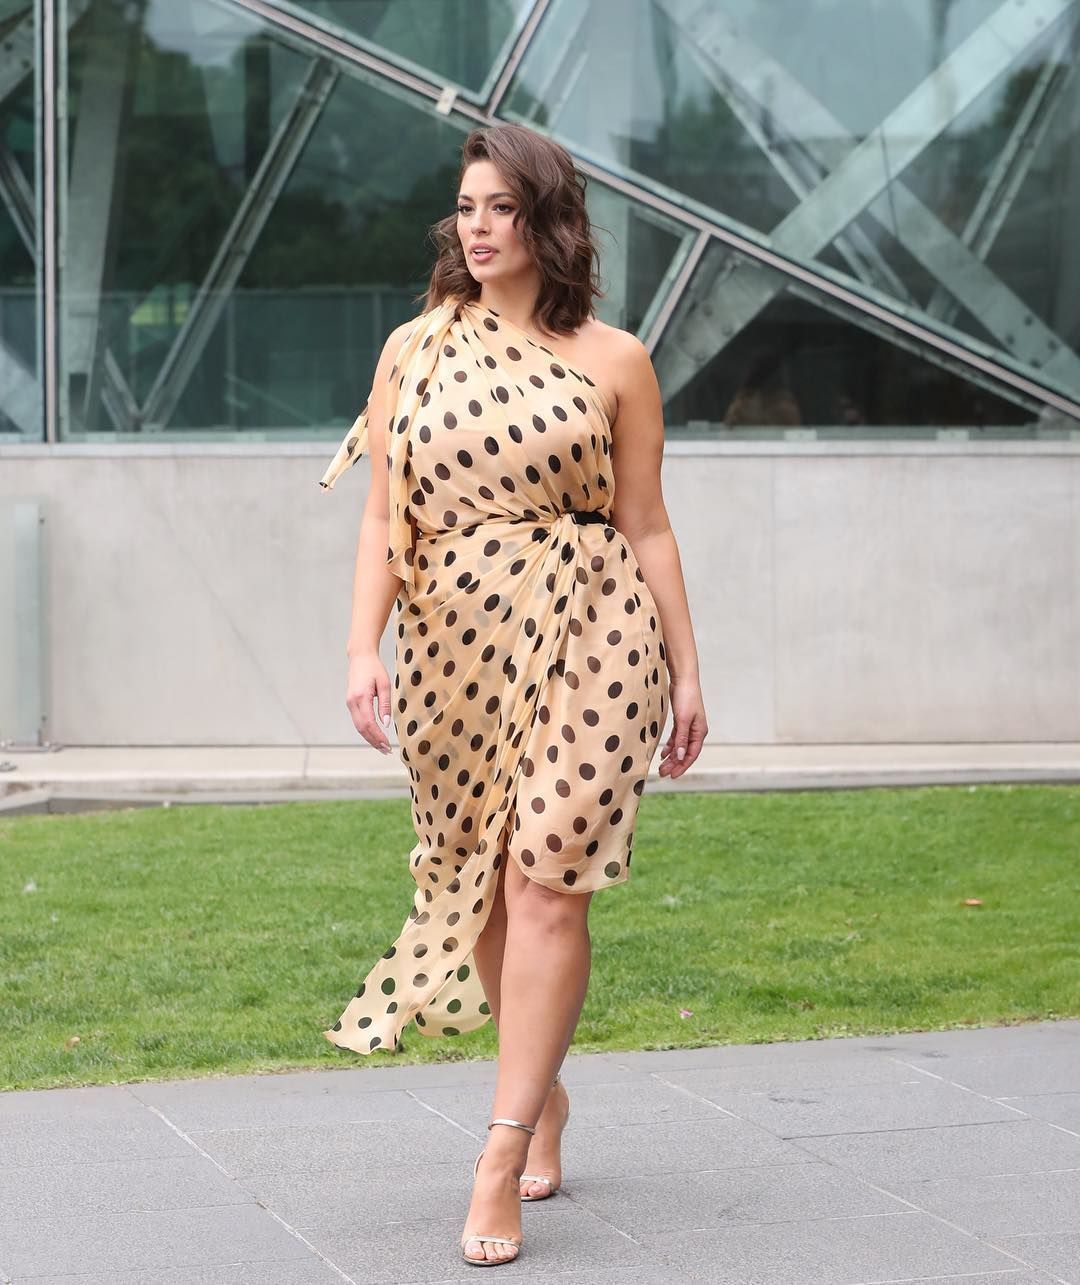 Get a perfect body, these are 7 ways to look sexy a la Ashley Graham